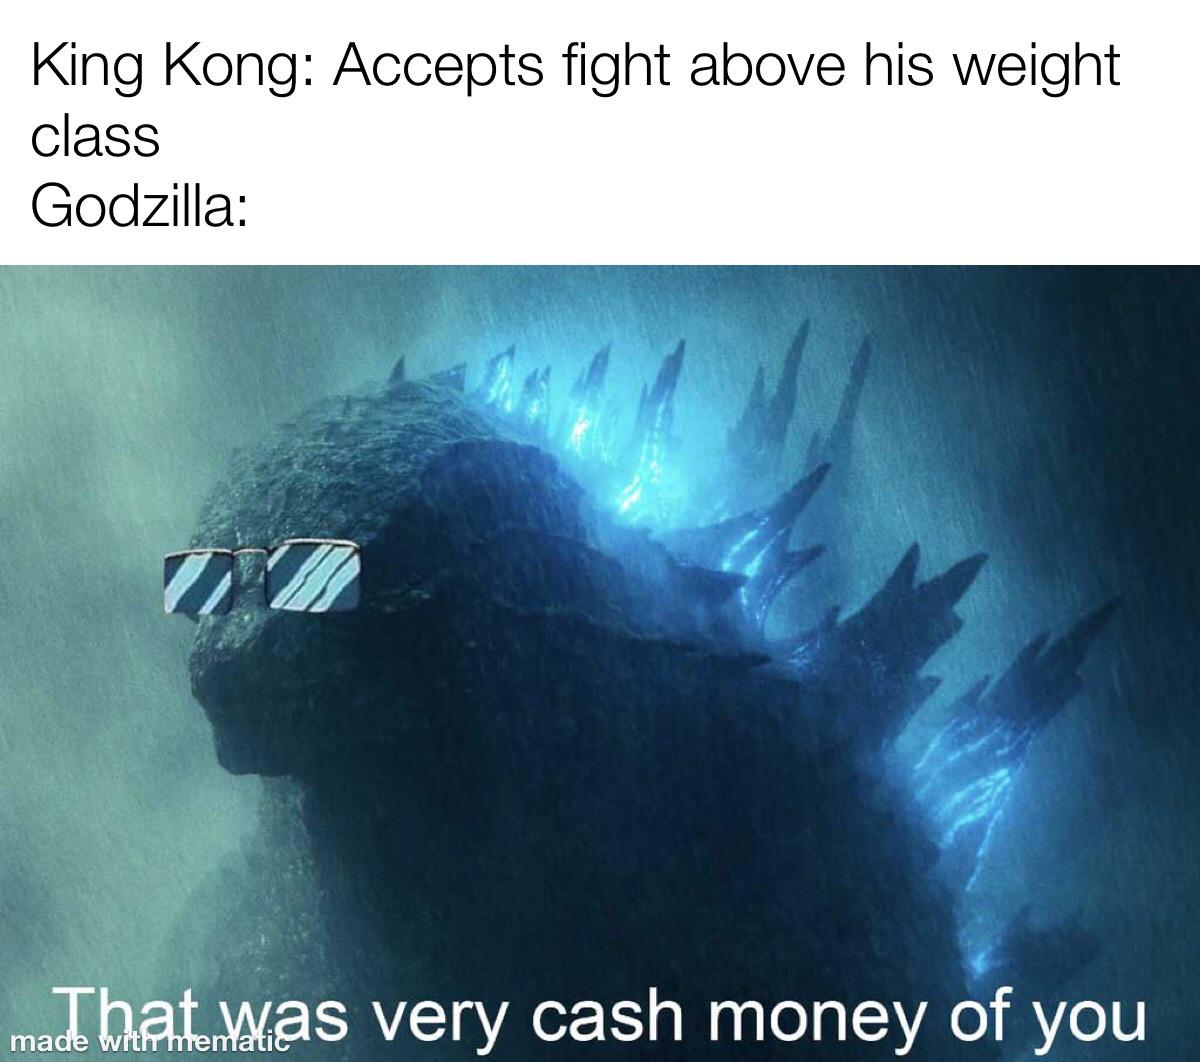 funny memes and random pics - very cash money of u - King Kong Accepts fight above his weight class Godzilla made batewas very cash money of you